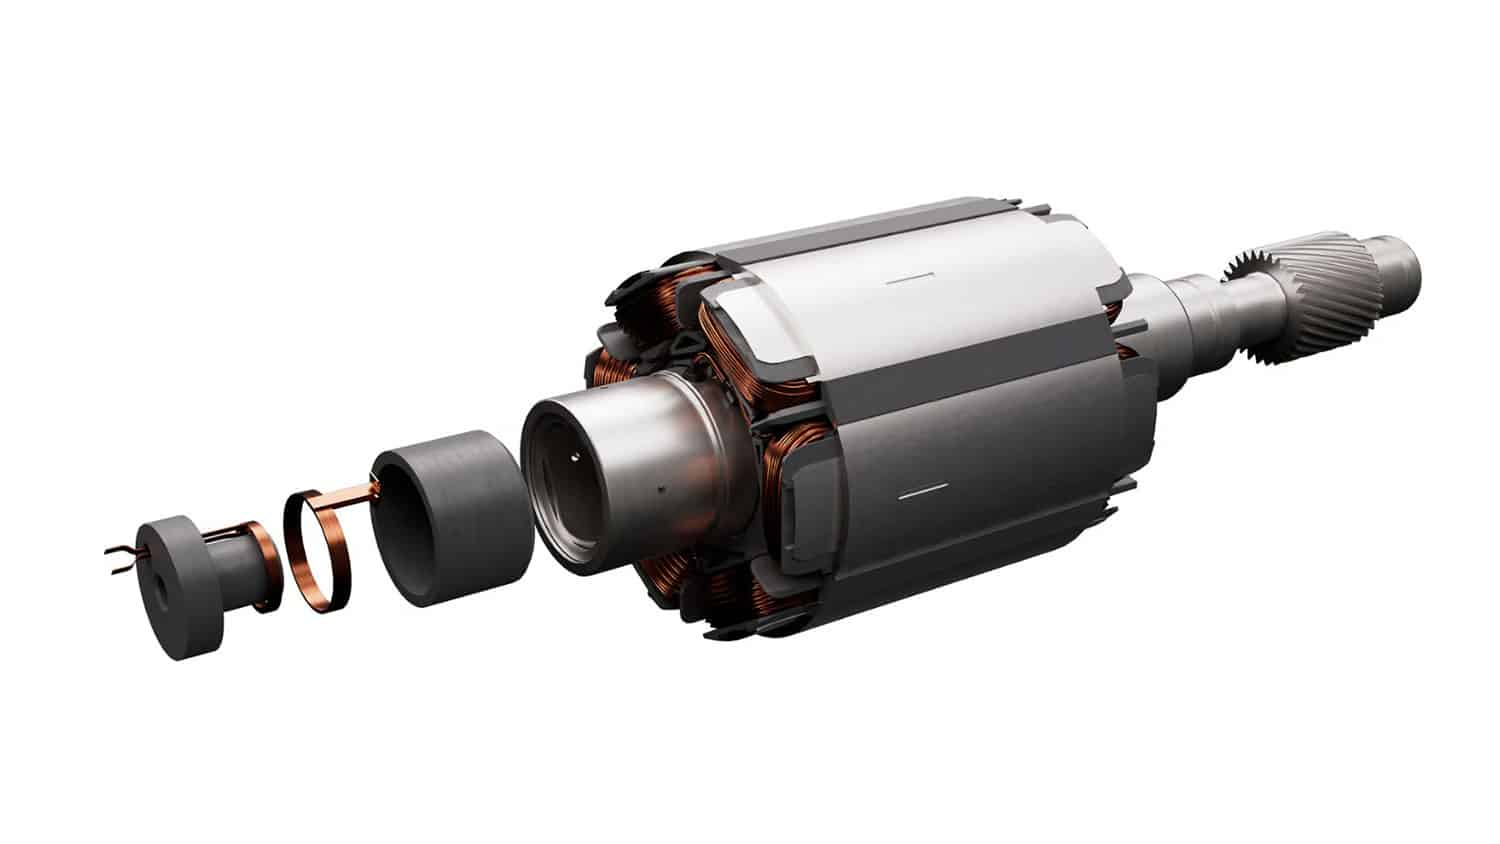 ZF has introduced an ultra-compact magnet-free electric motor that is more resource-efficient and sustainable.